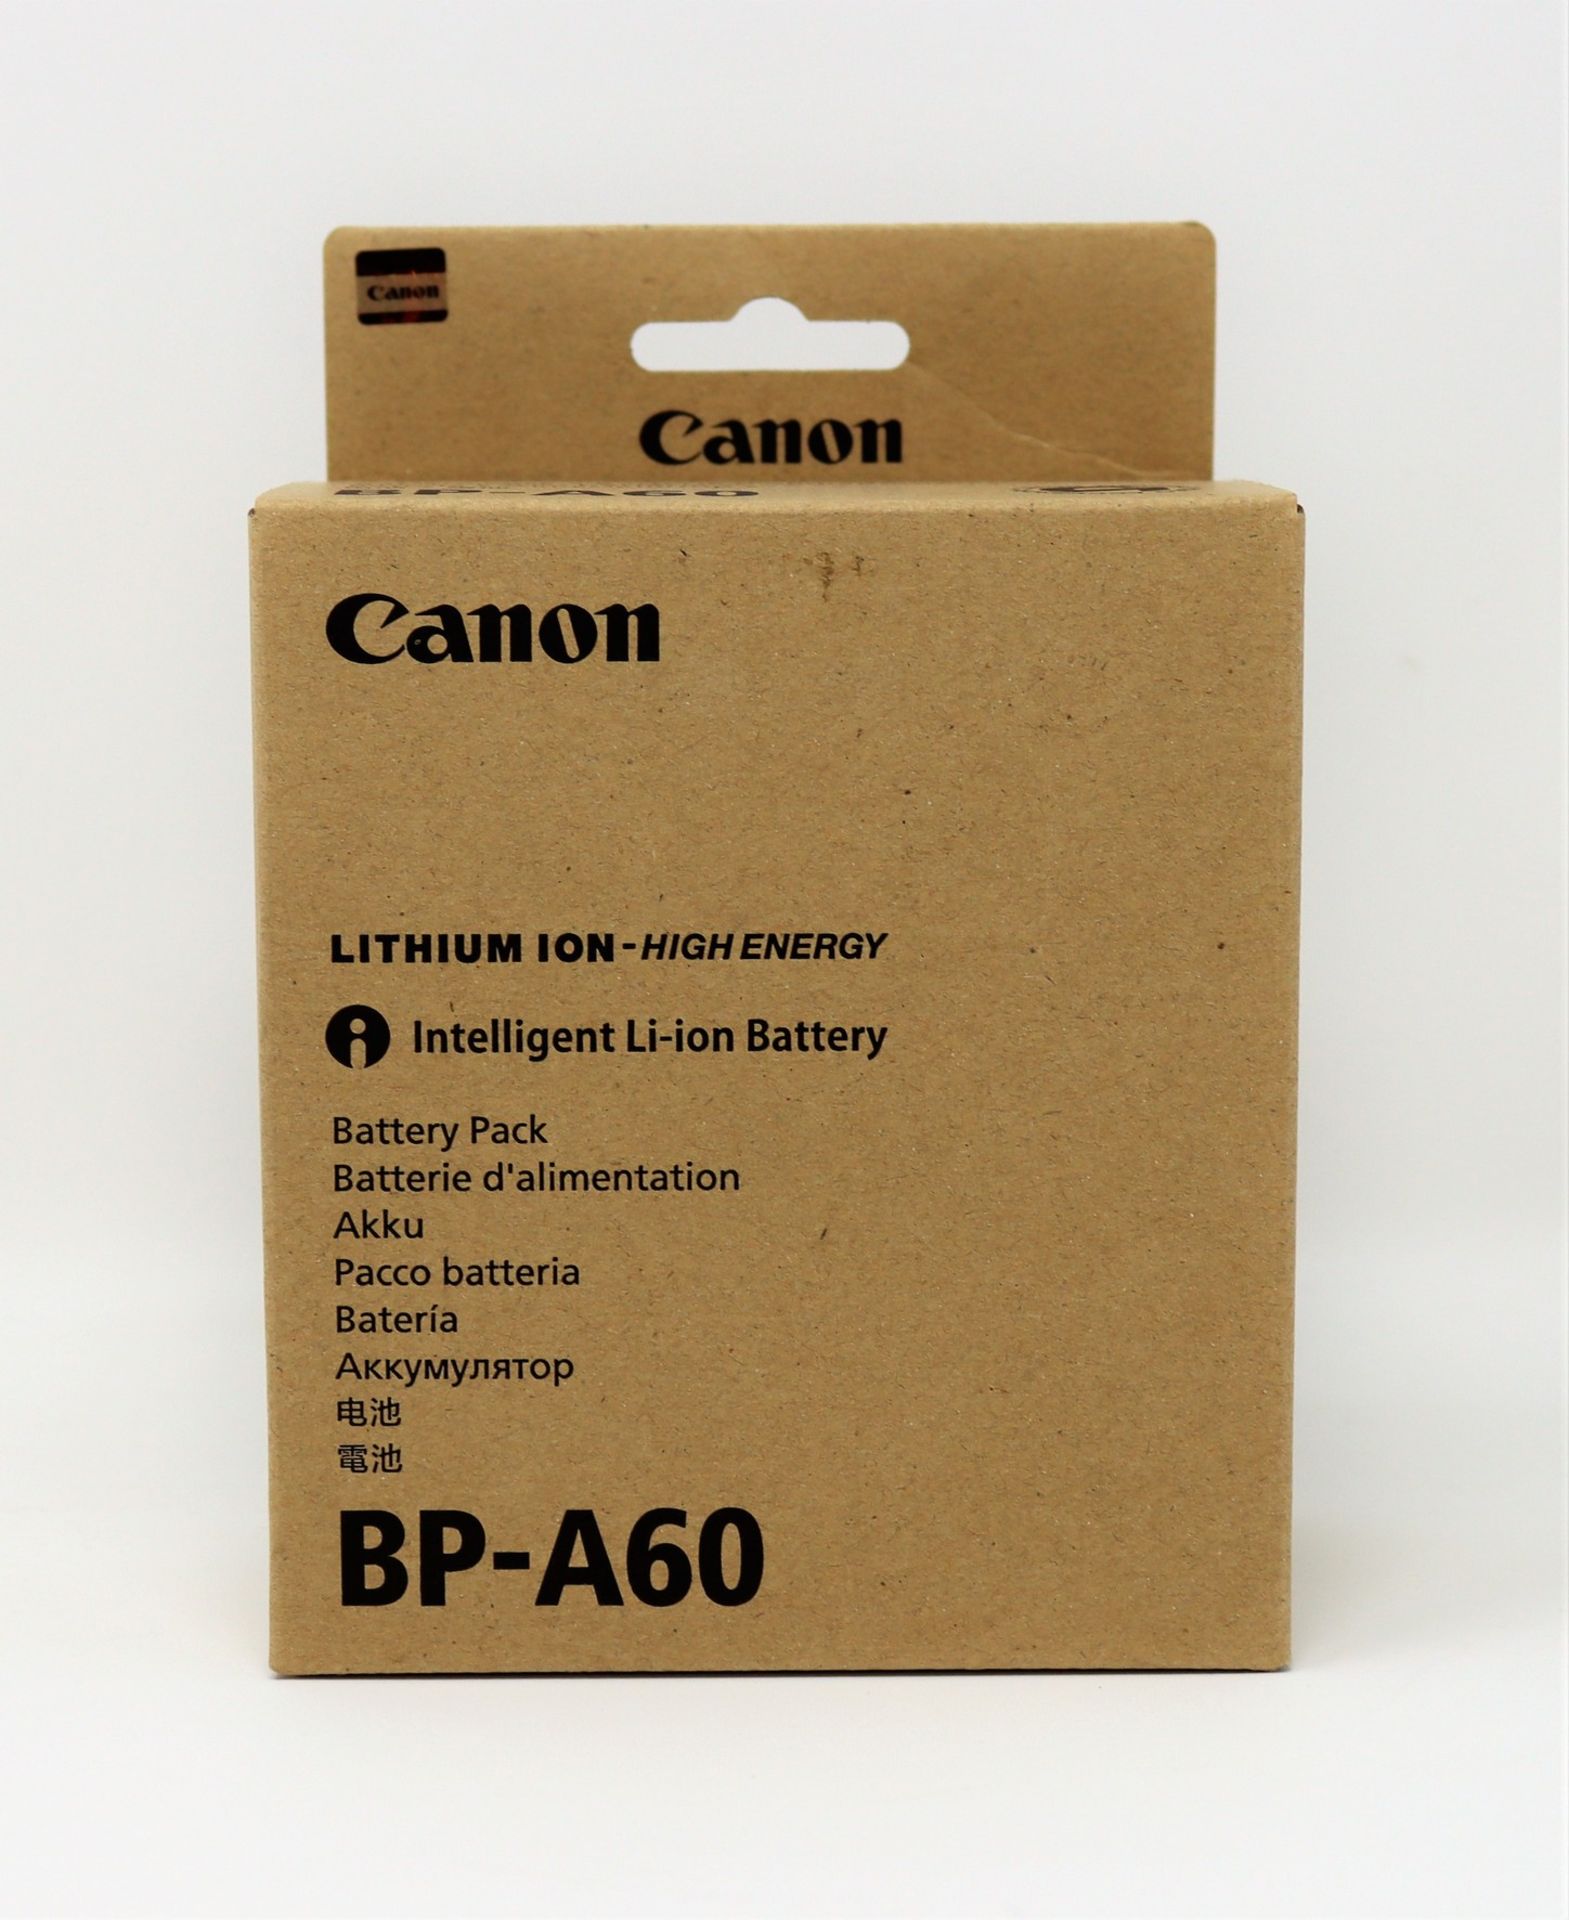 A boxed as new Canon BP-A60 Battery Pack for EOS C300 MK II (P/N: 0870C002AA).